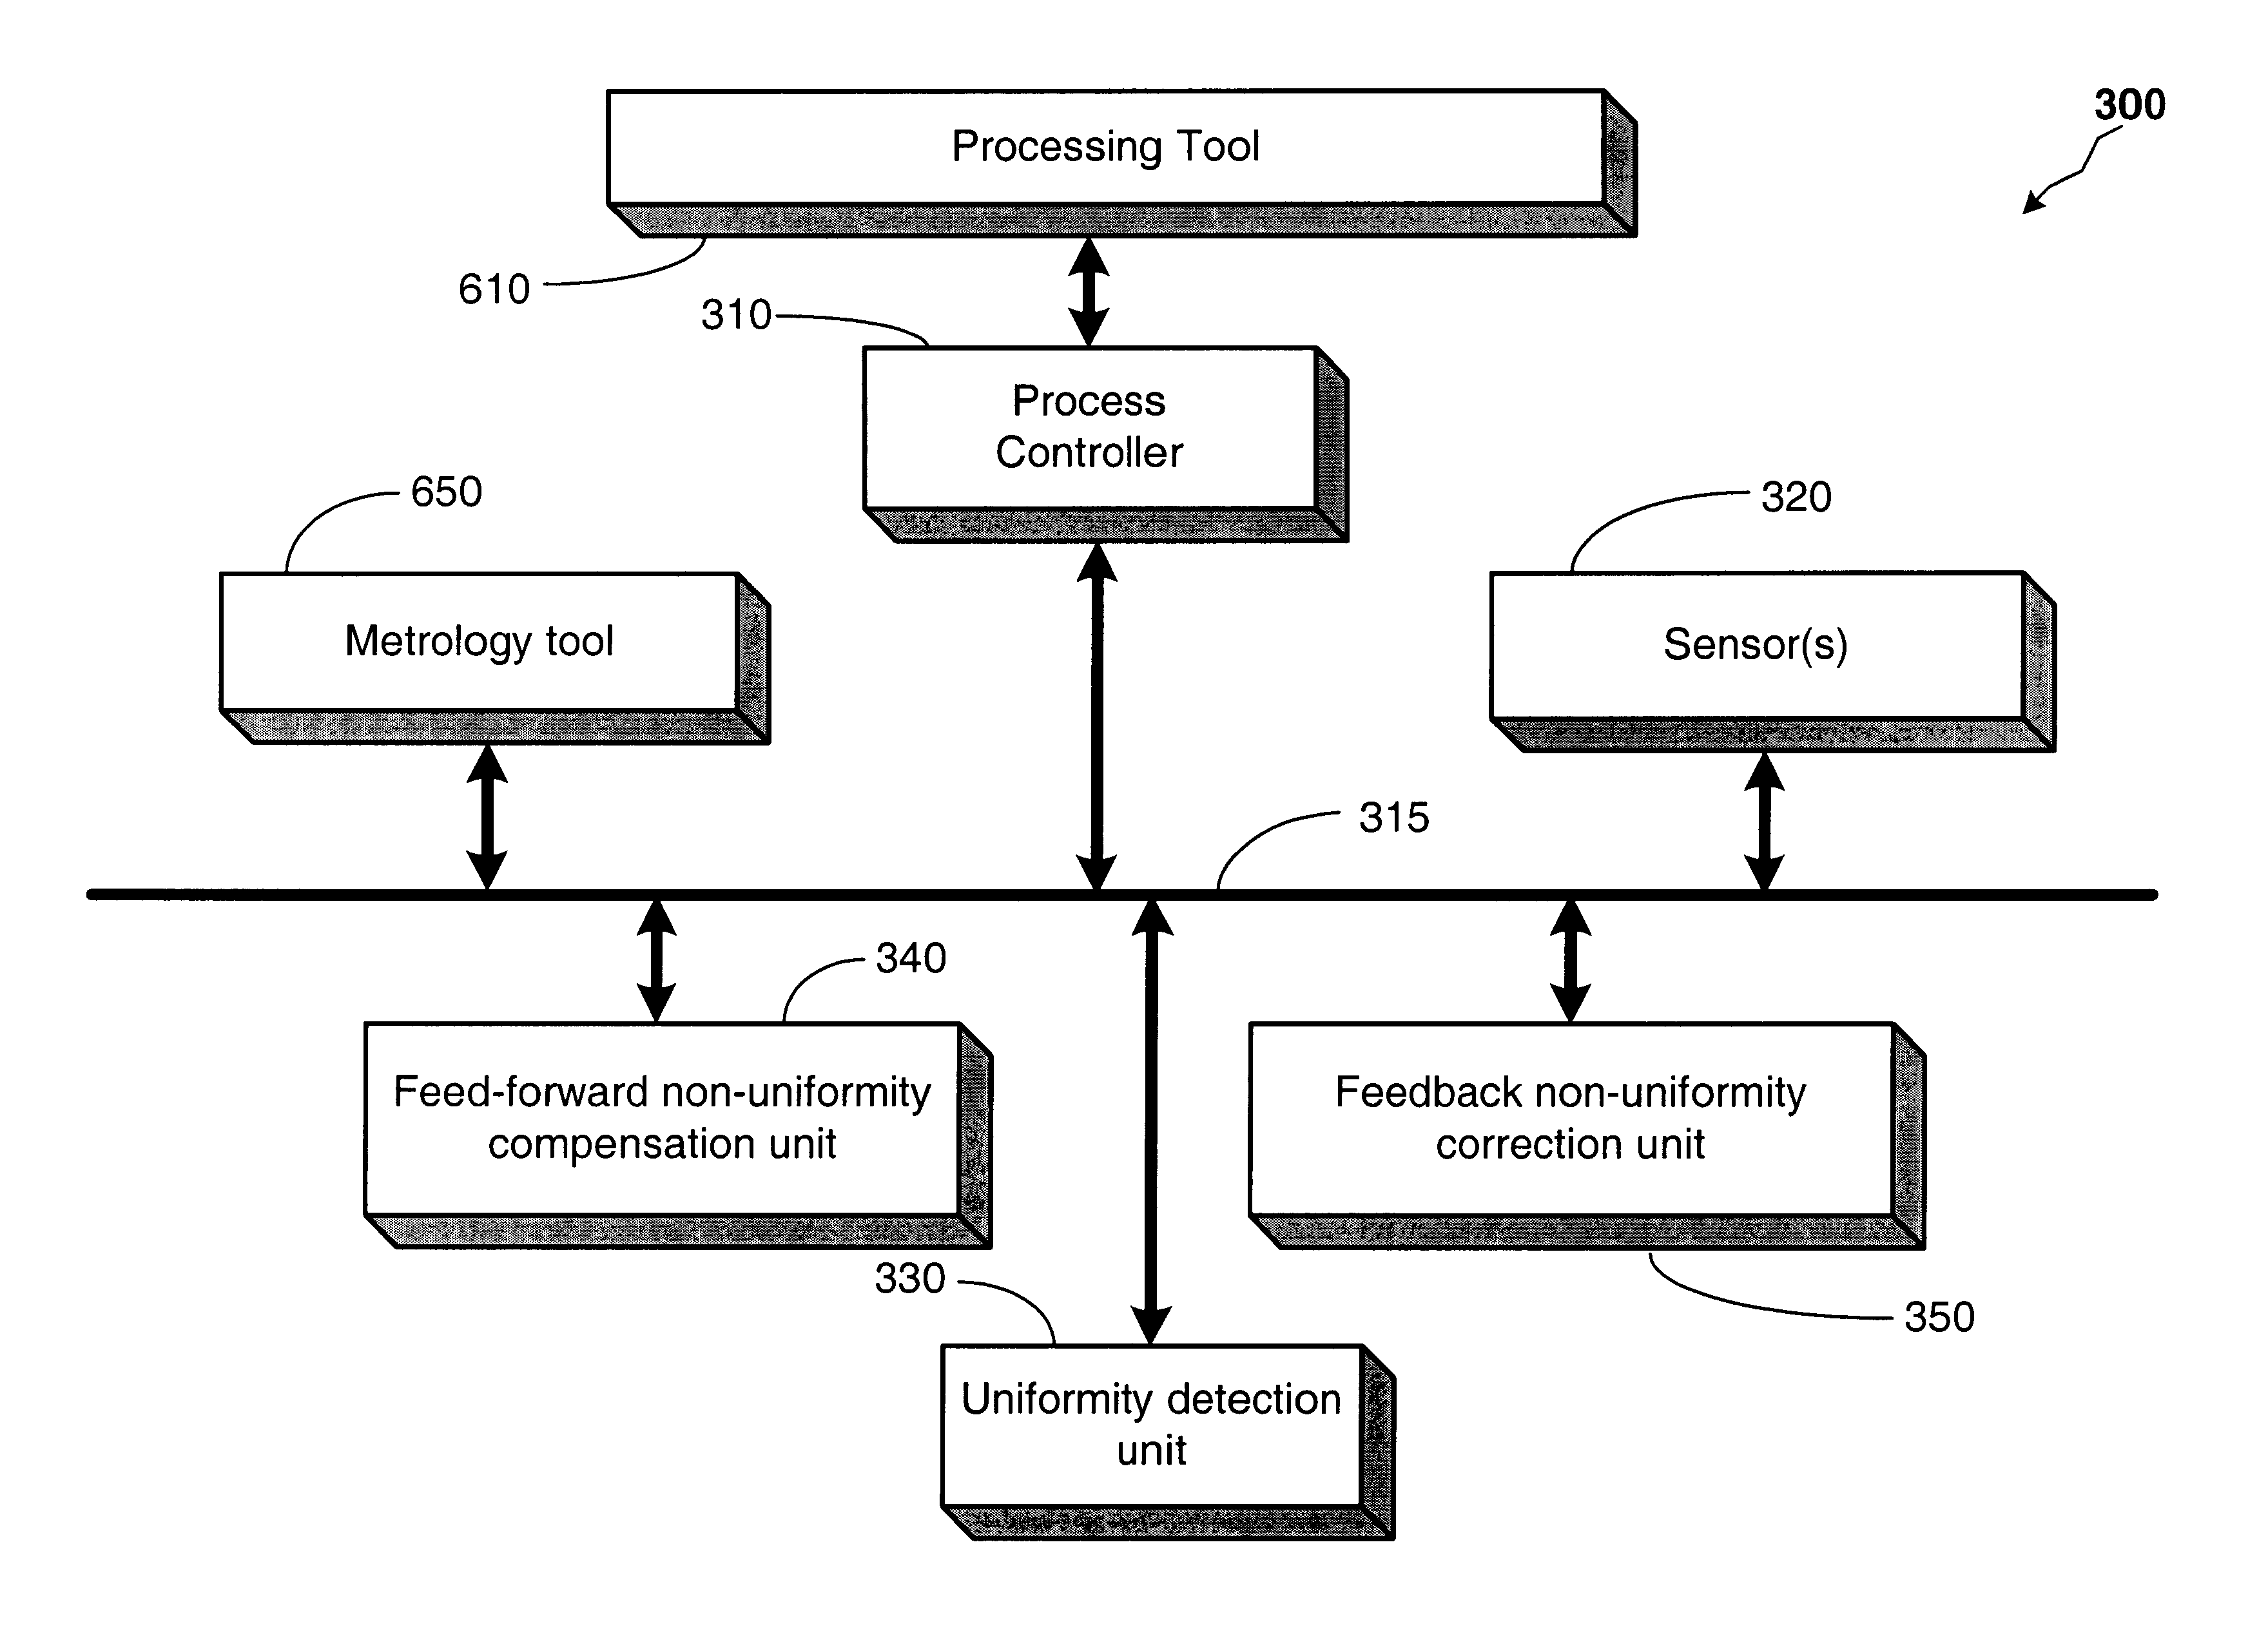 Dynamic process state adjustment of a processing tool to reduce non-uniformity